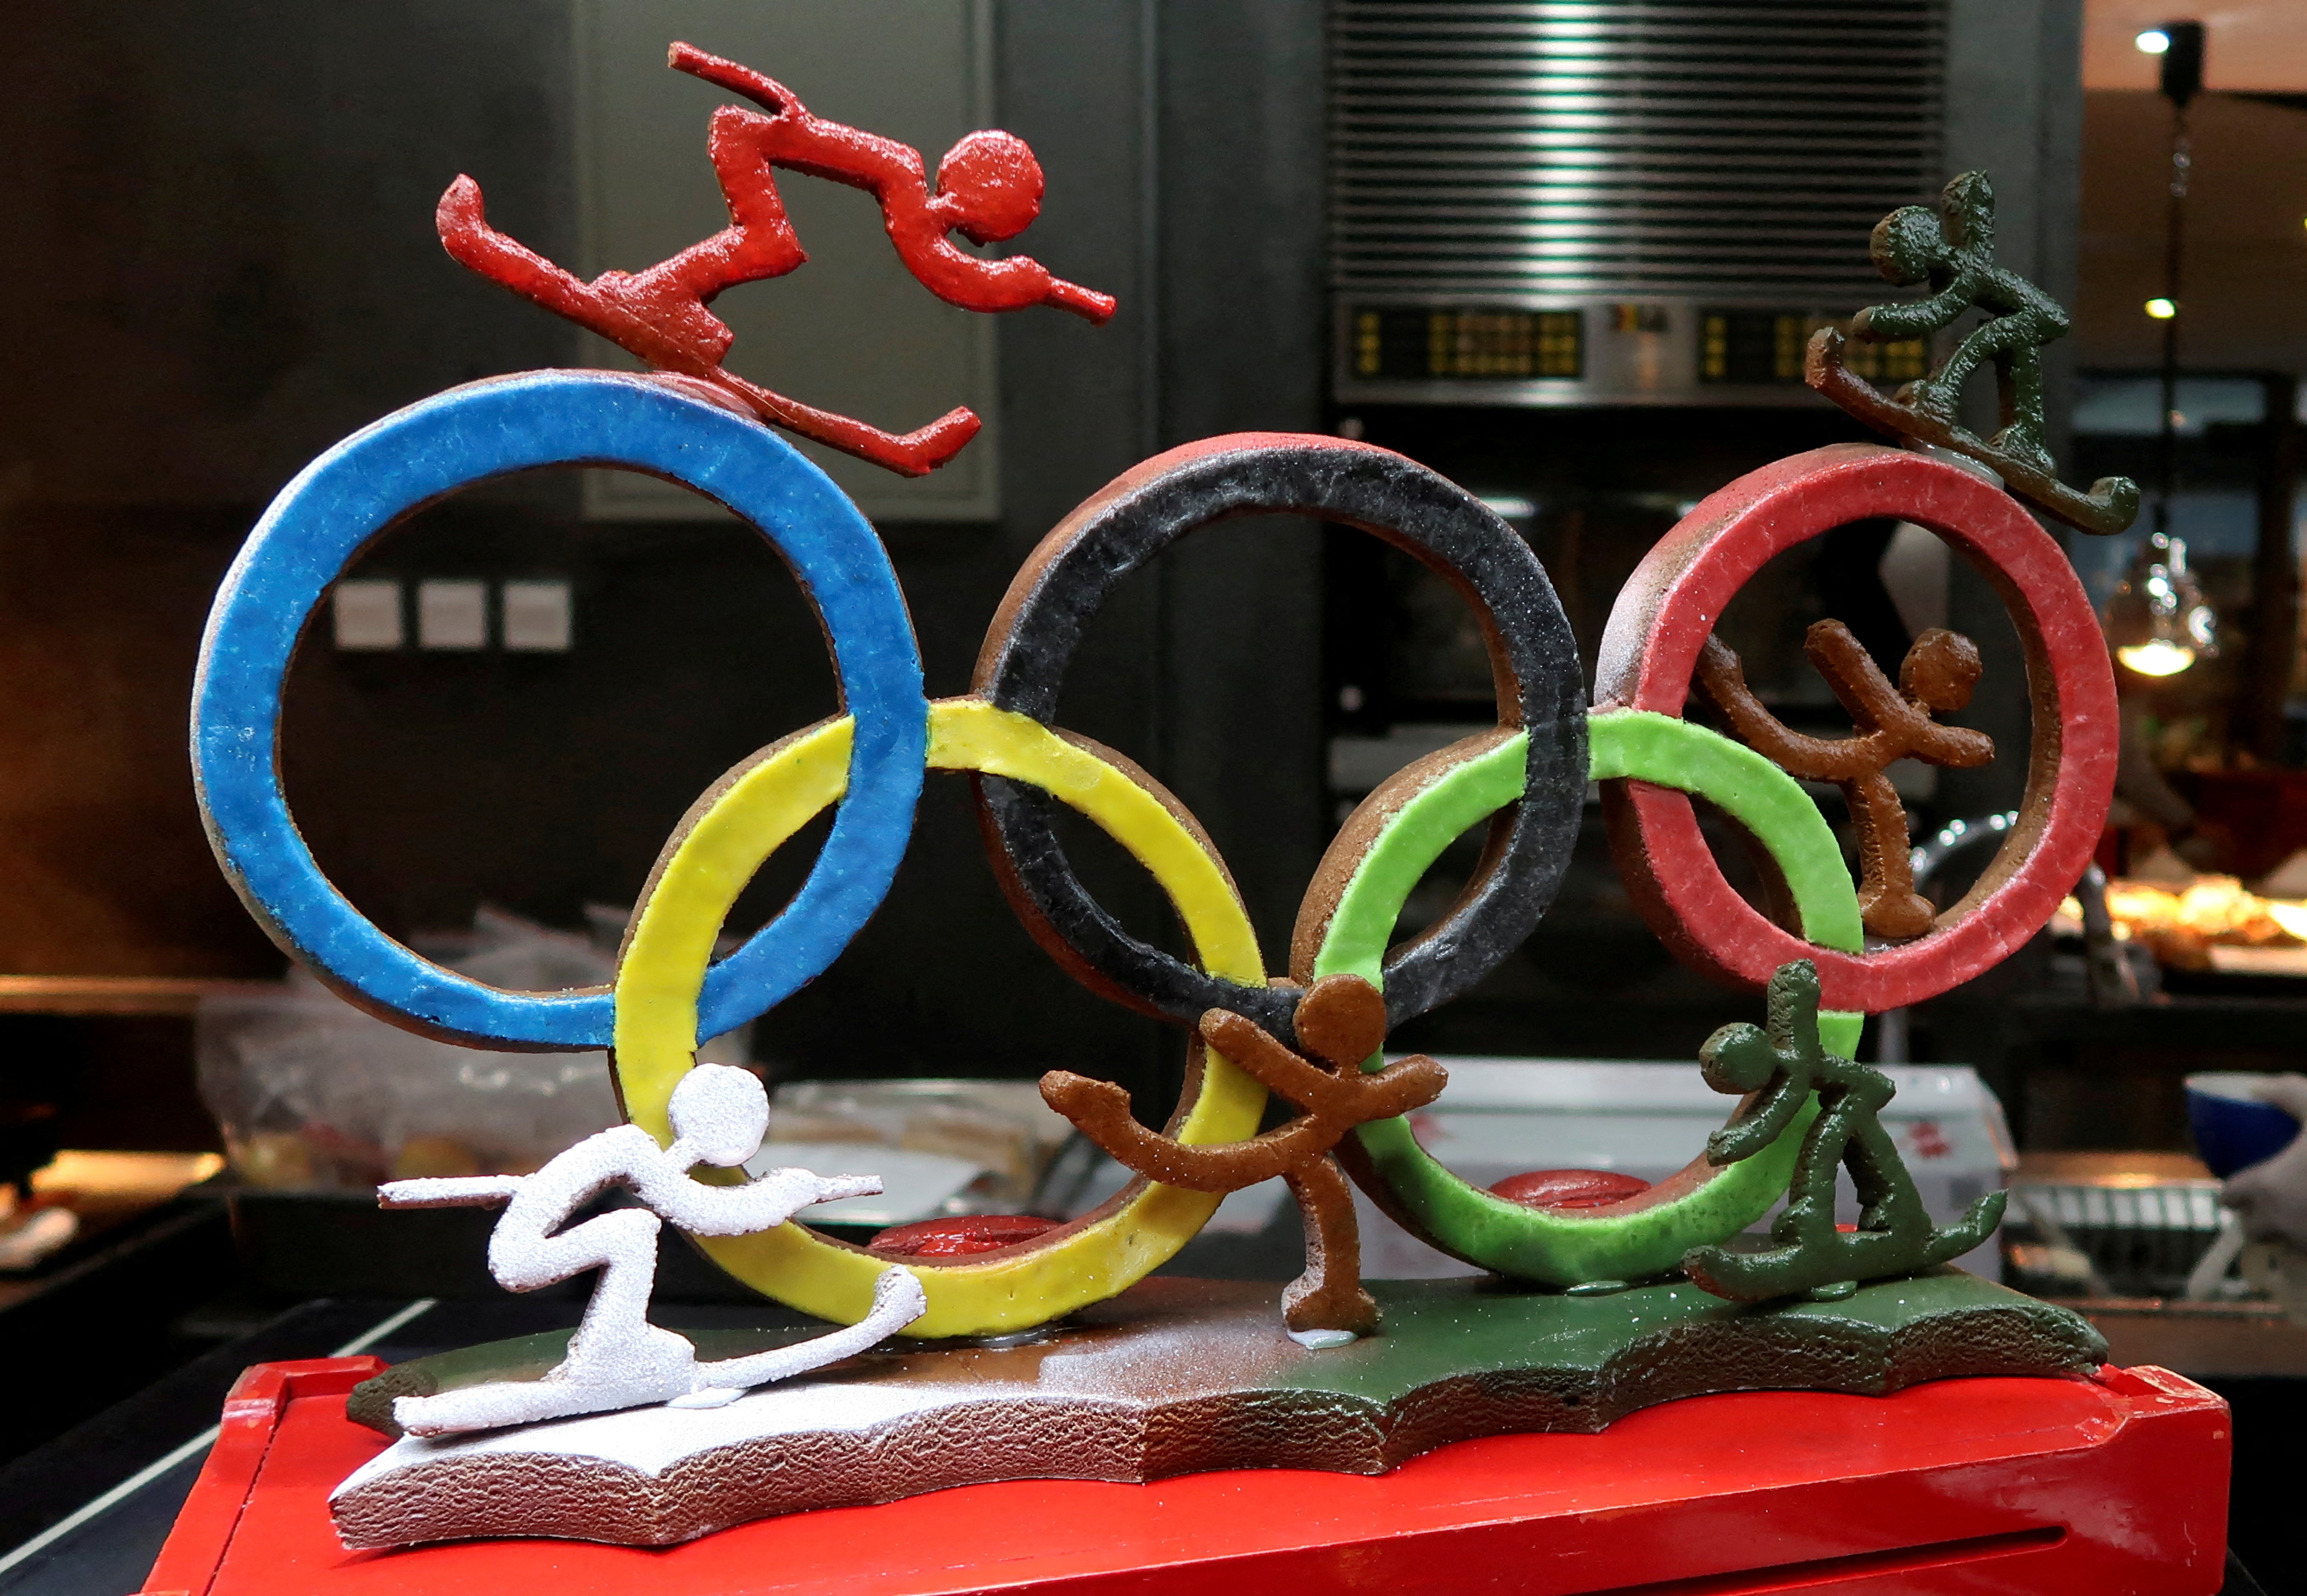 A baking creation of the Olympic rings is on display in a hotel ahead of the Beijing 2022 Winter Olympics in Beijing